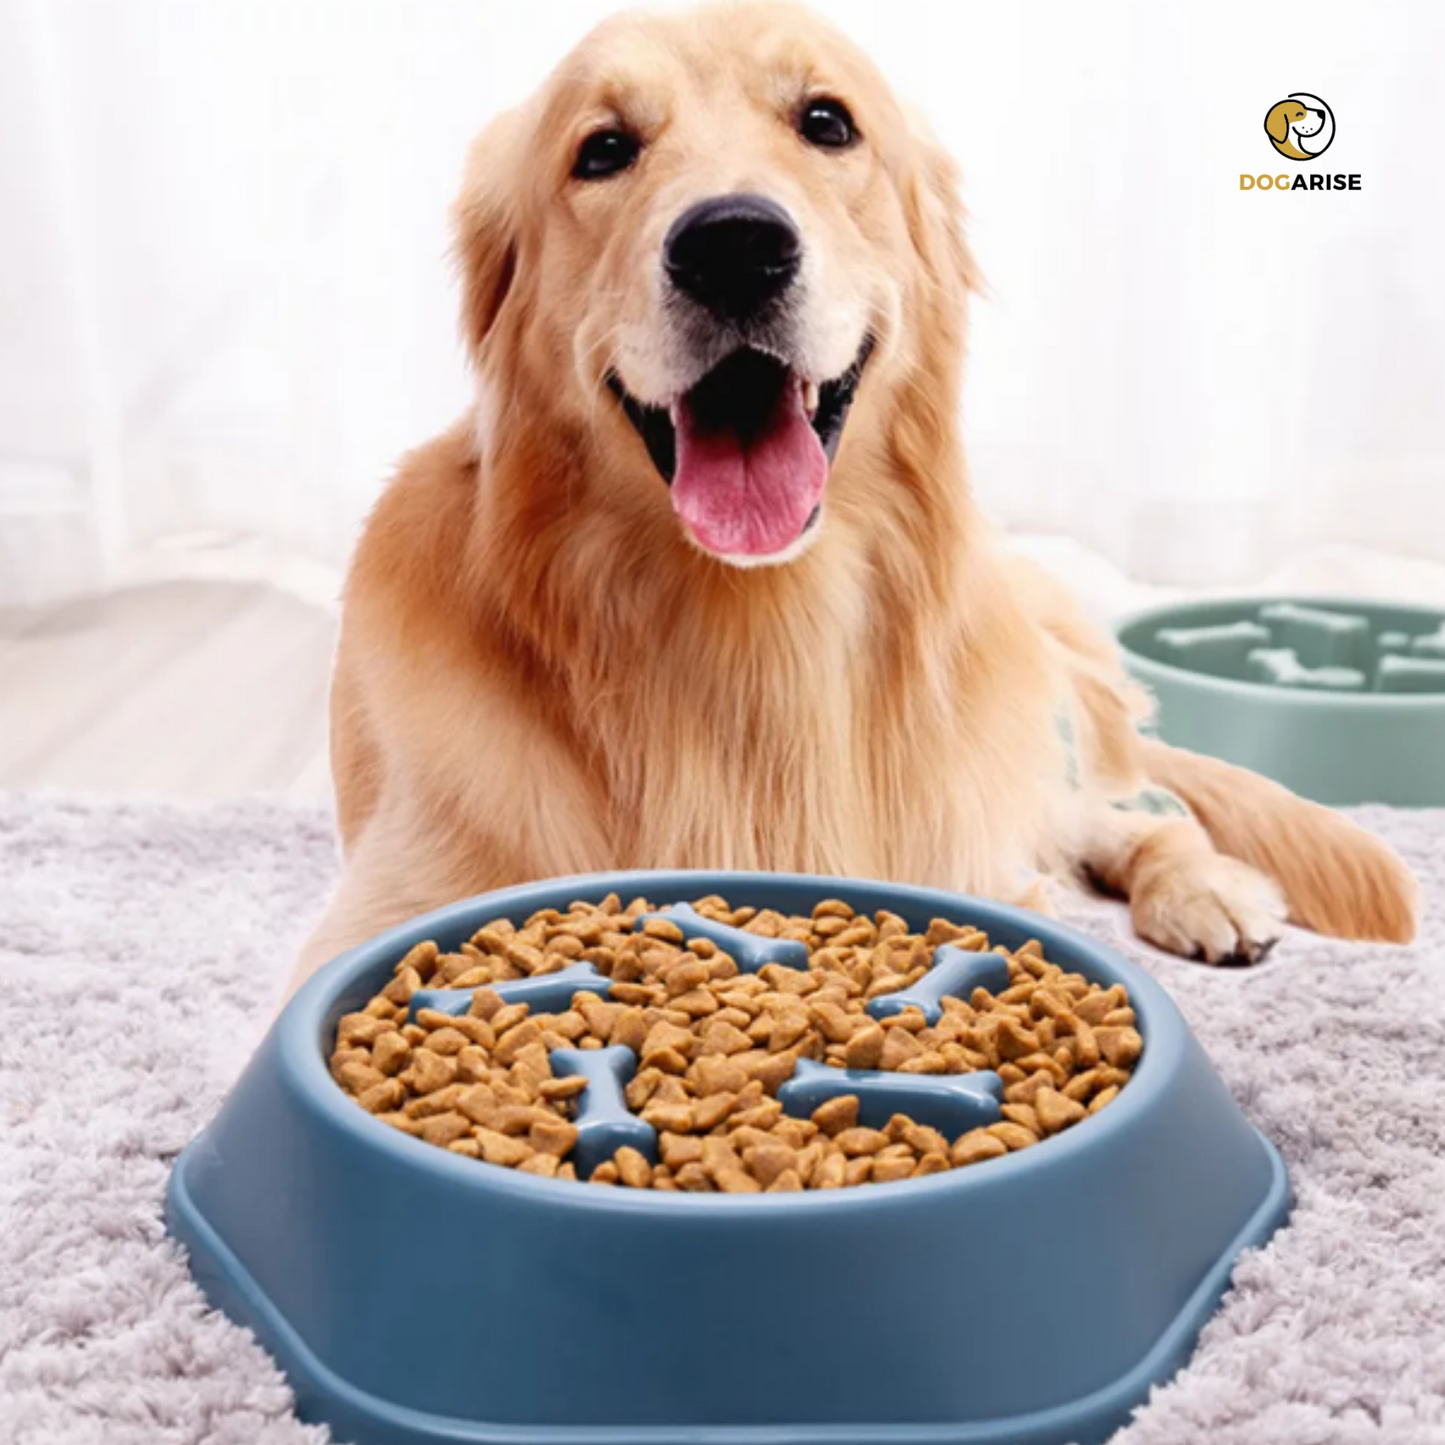 FeedFlow™ - Ensuring Controlled and Deliberate Canine Feeding - Dogarise